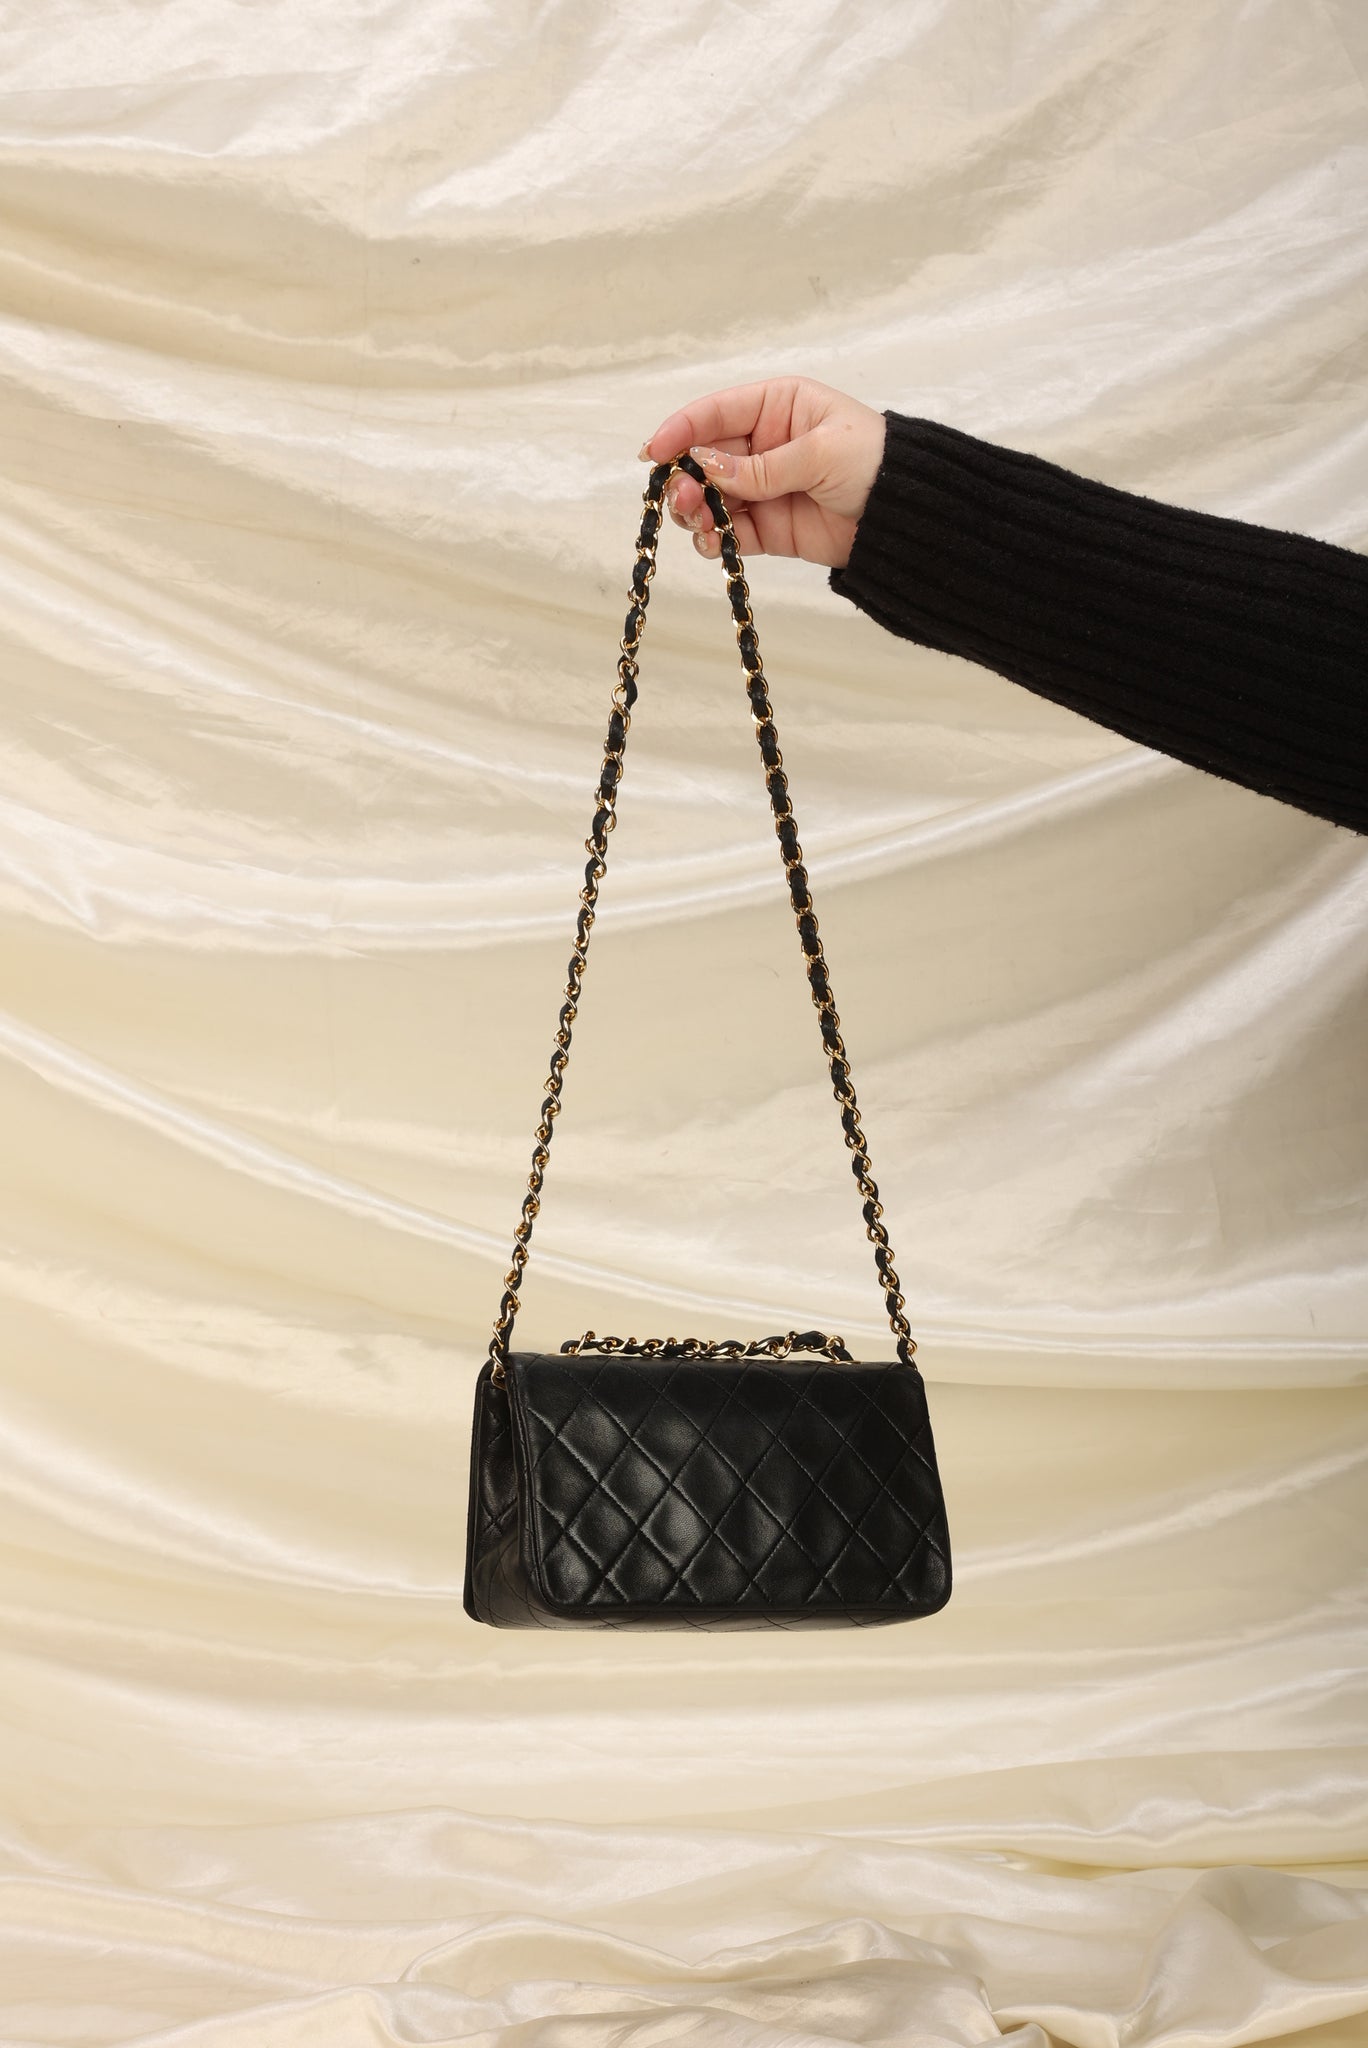 Chanel Lambskin Cambon Mini Pouch with Chain